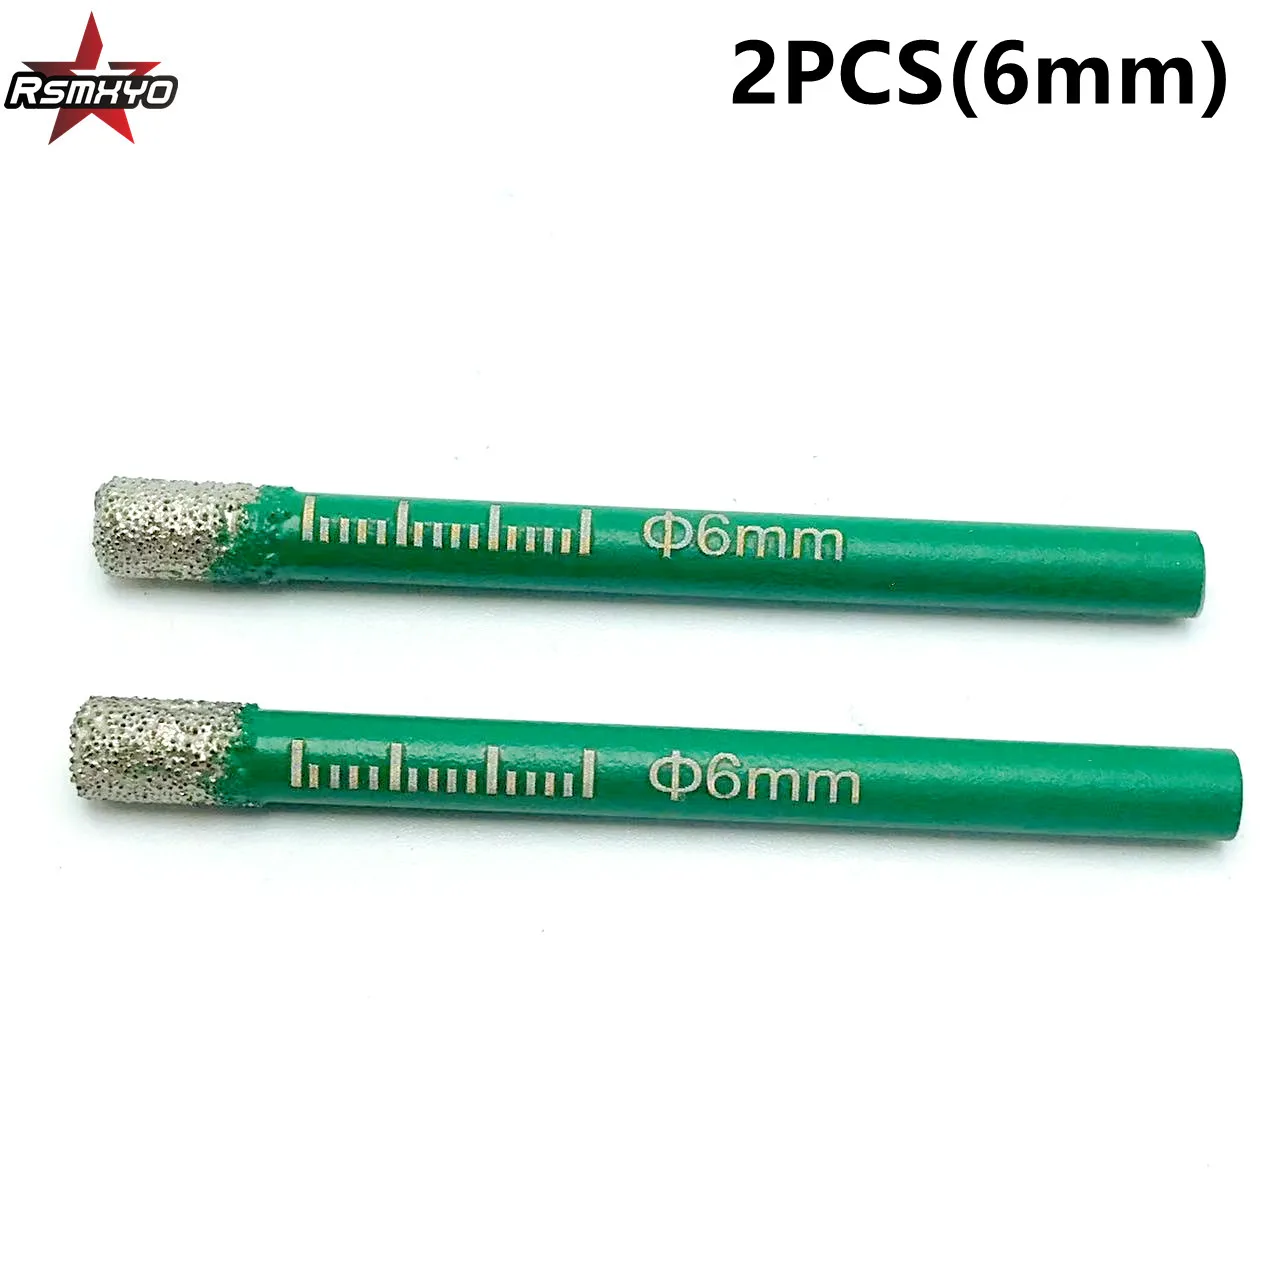 2PCS 6mm Vaccum Brazed Diamond Dry Drill Bits Hole Saw Cutter For Granite Marble Ceramic Tile Glass Power Tools Accessories lerdge 3d printer parts heated bed clip platform clamp heatbed retainer glass plate fixing adjustable clips accessories 2pcs